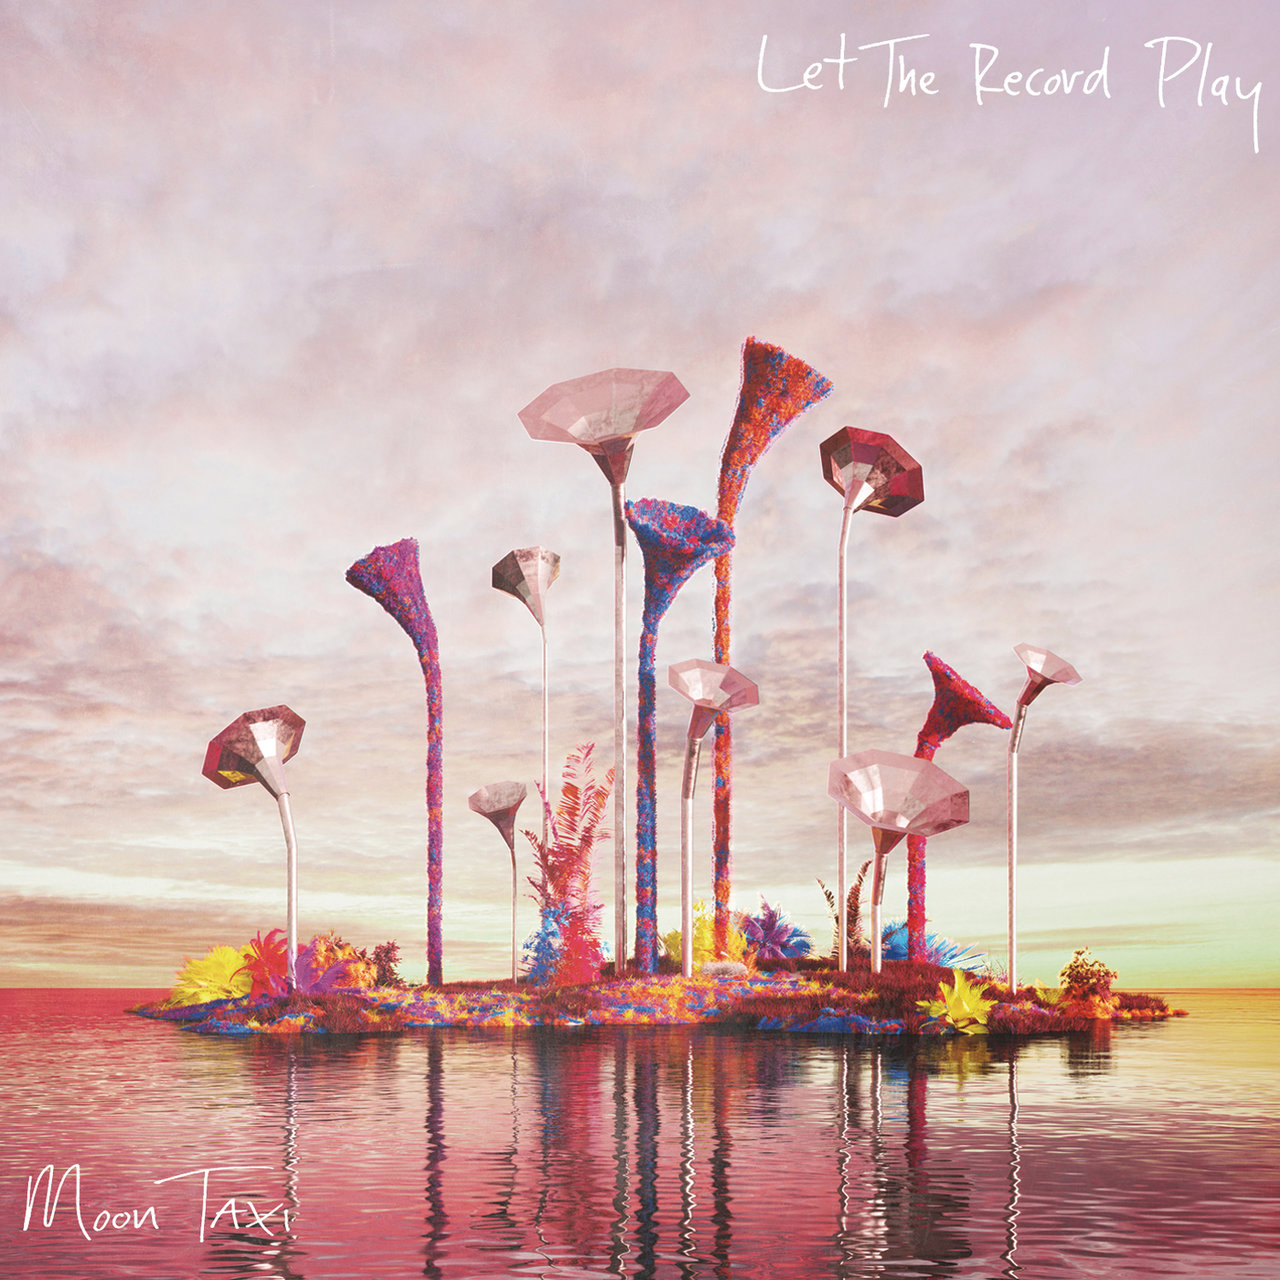 Moon Taxi Let The Record Play cover artwork